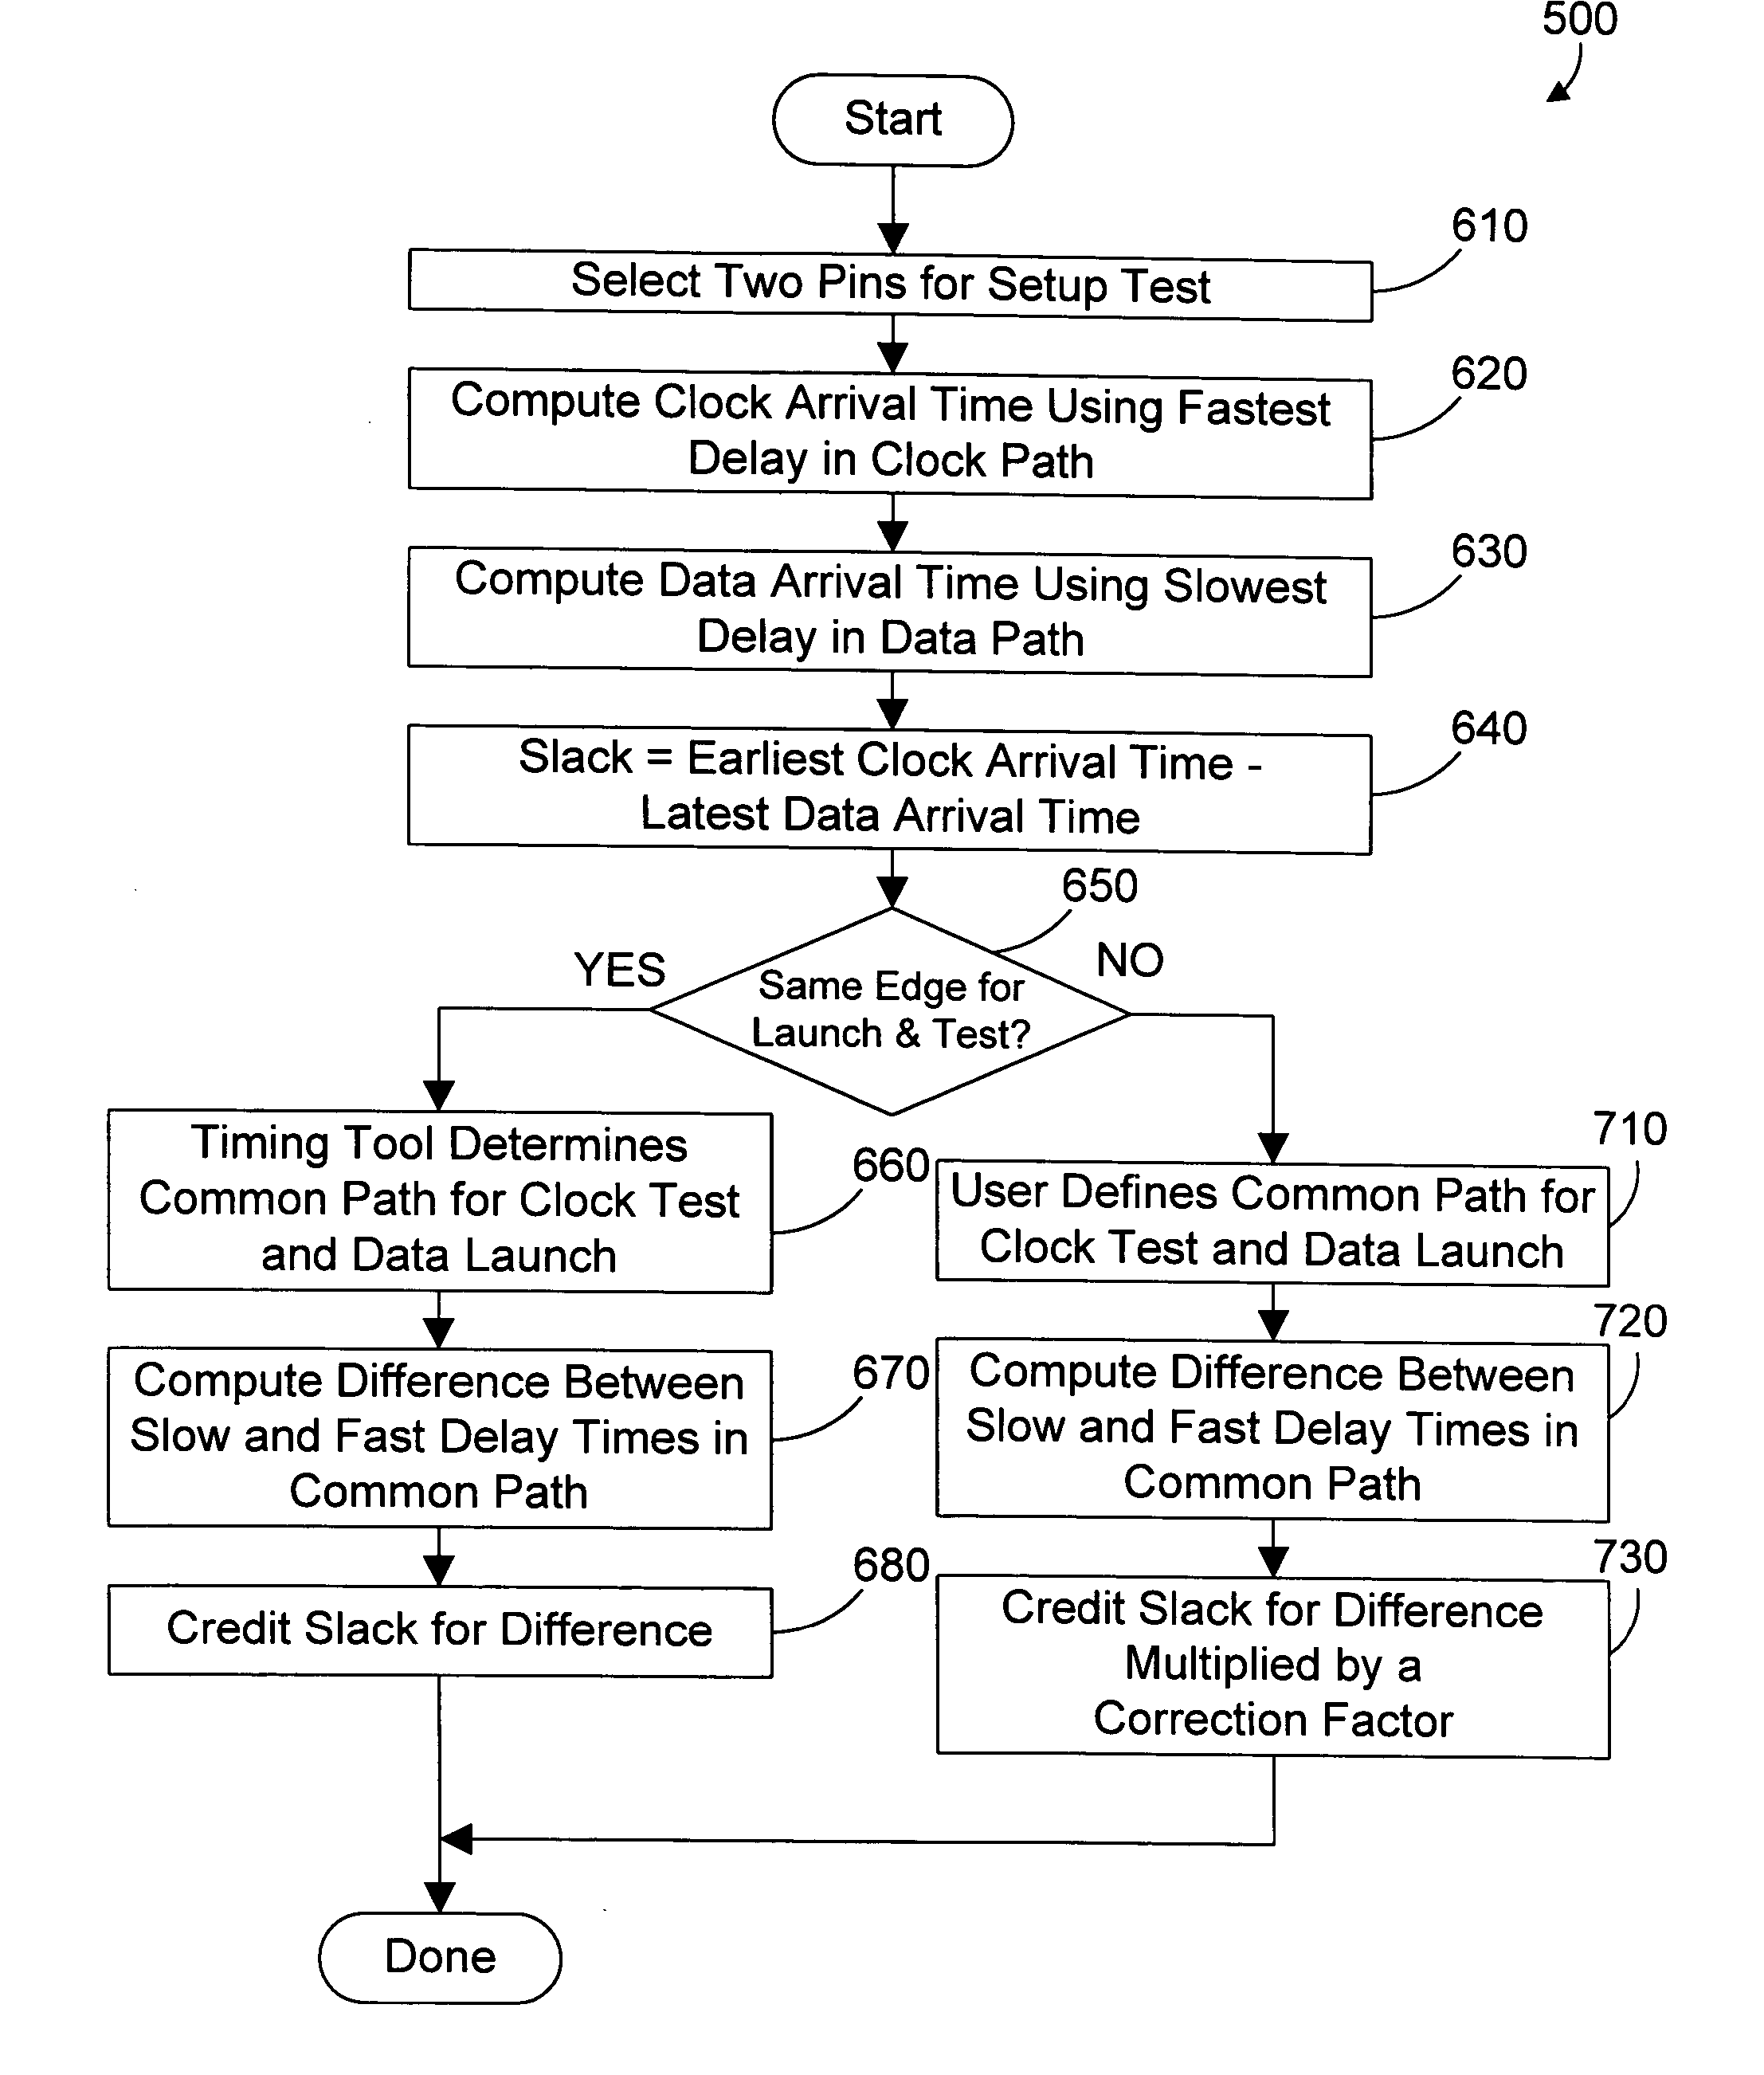 Apparatus and method for performing static timing analysis of an integrated circuit design